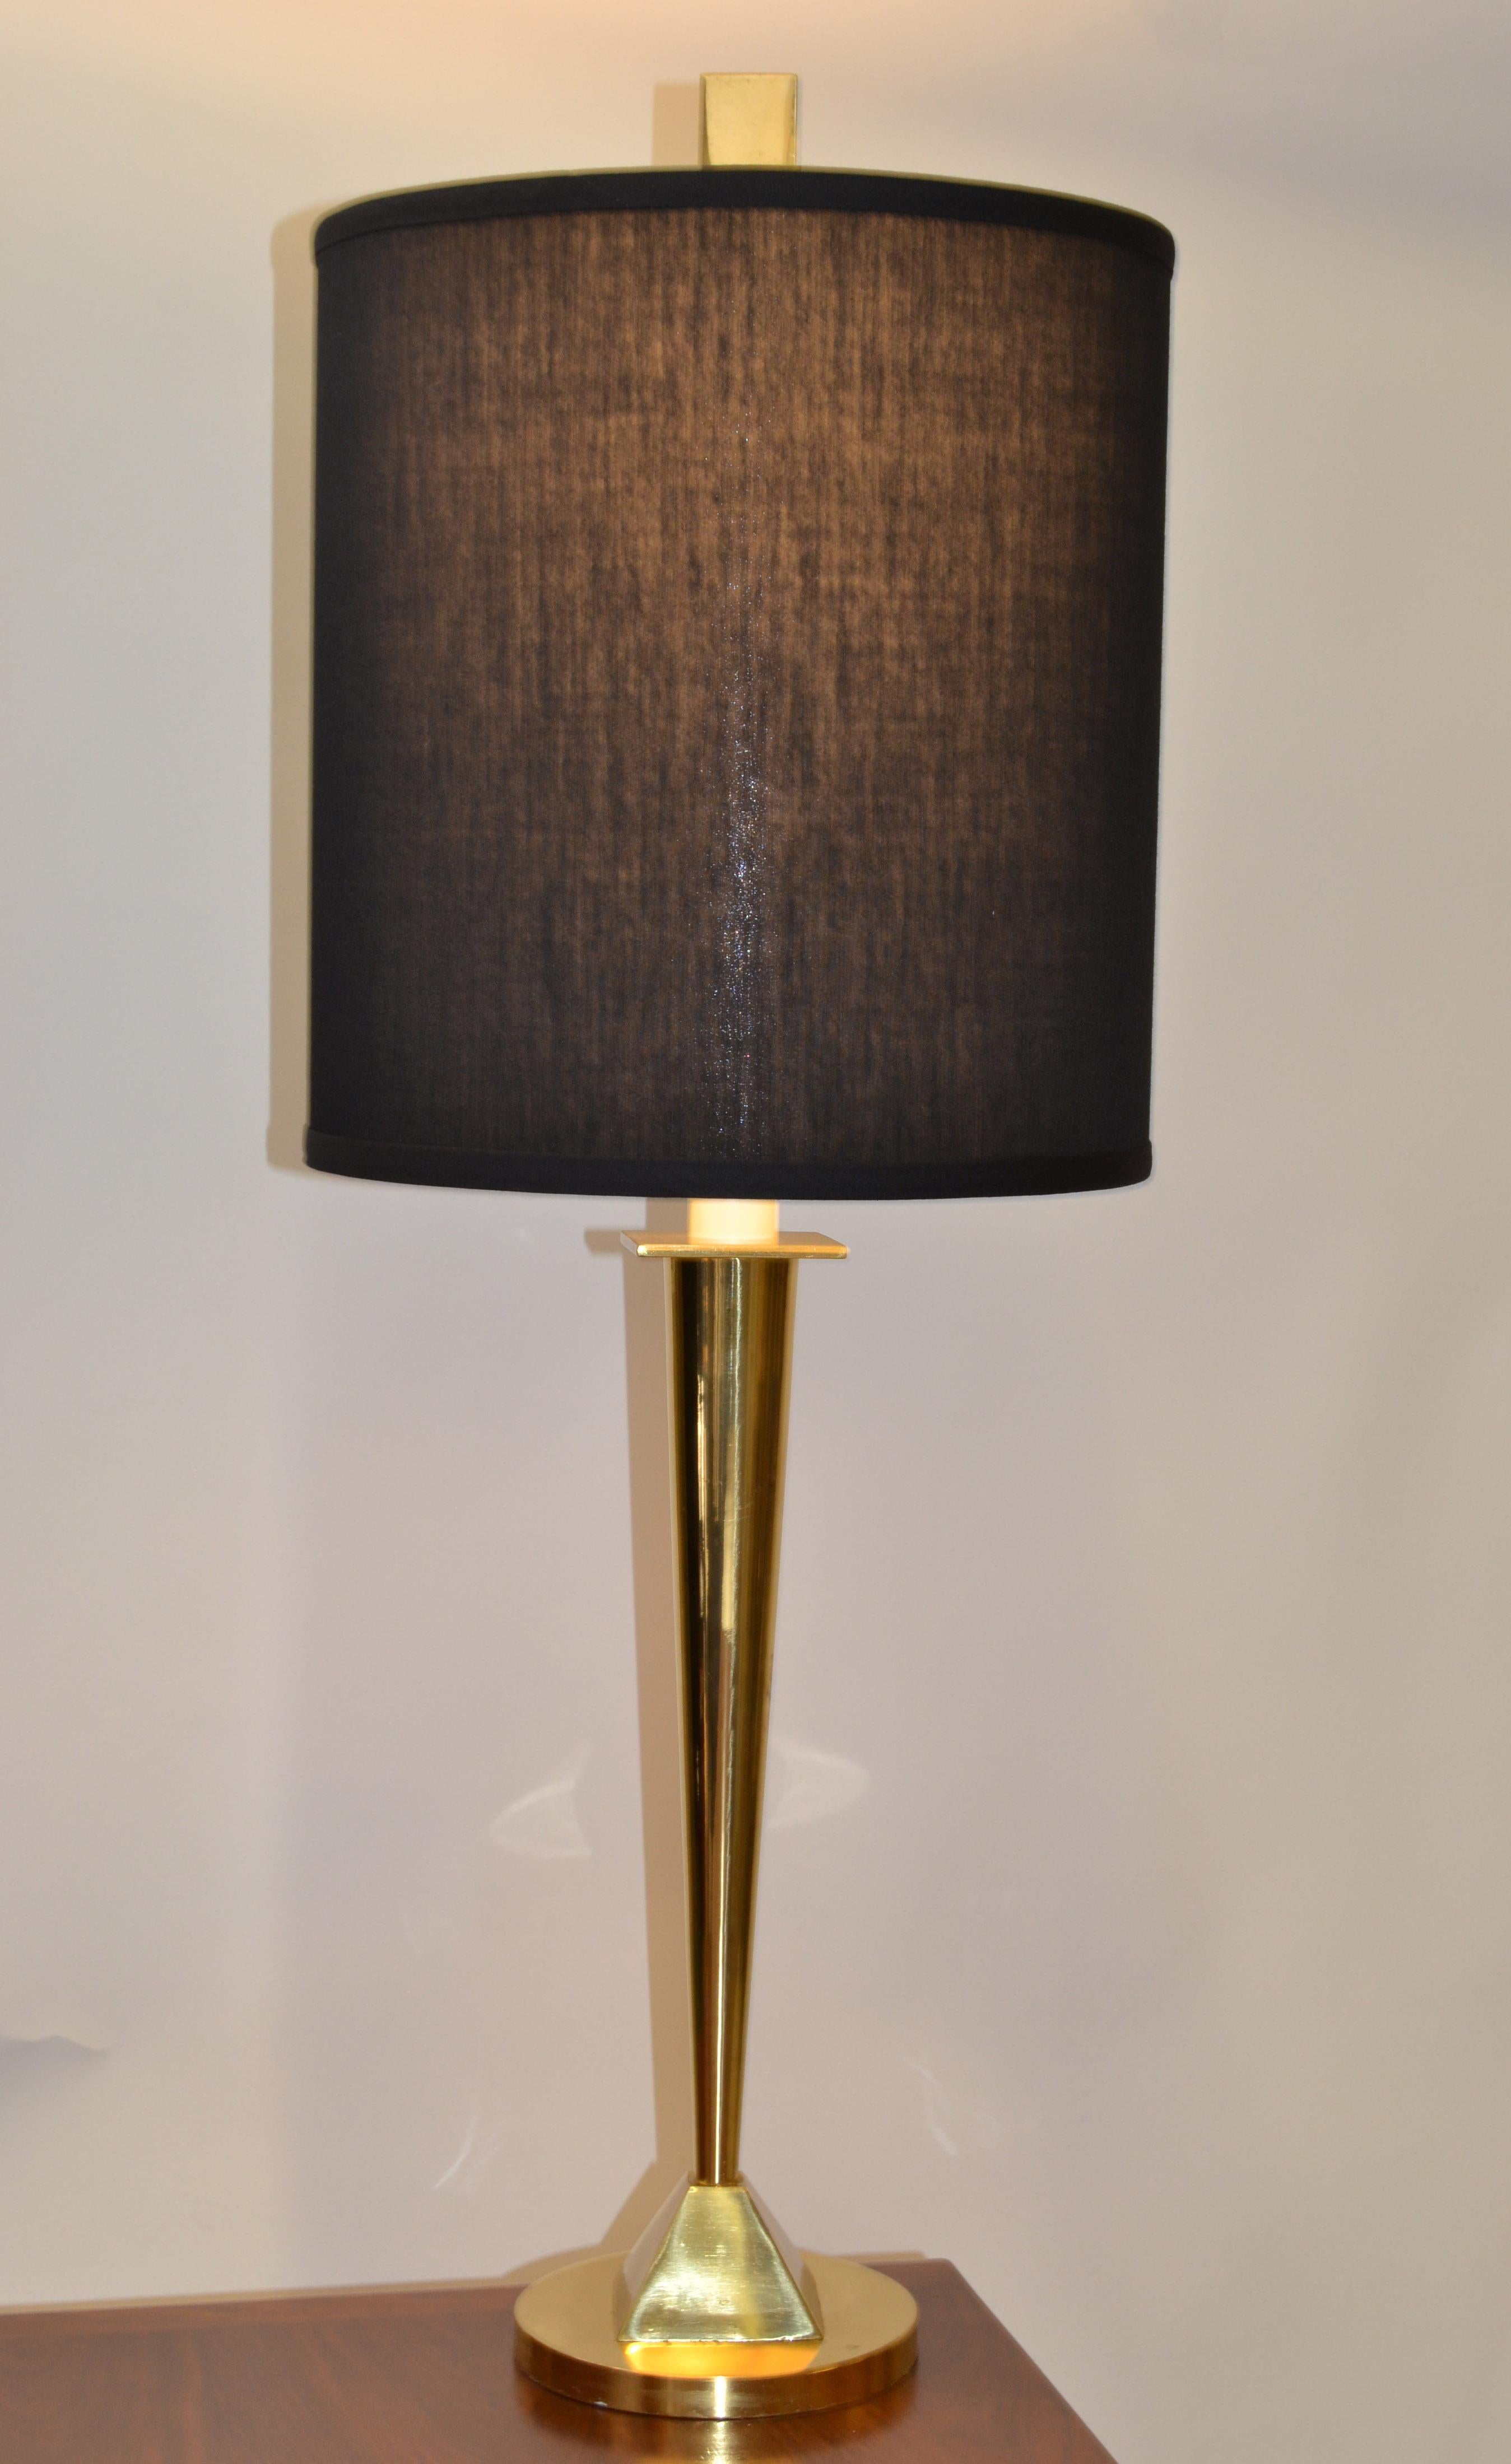 Minimalism Italian solid brass table lamp with geometrical shaped stem and round base.
Comes with black fabric drum shade, harp and finial.
US Rewiring and the lamp takes a regular or LED light bulb.
Mid-Century Modern Design made in 1993.
In